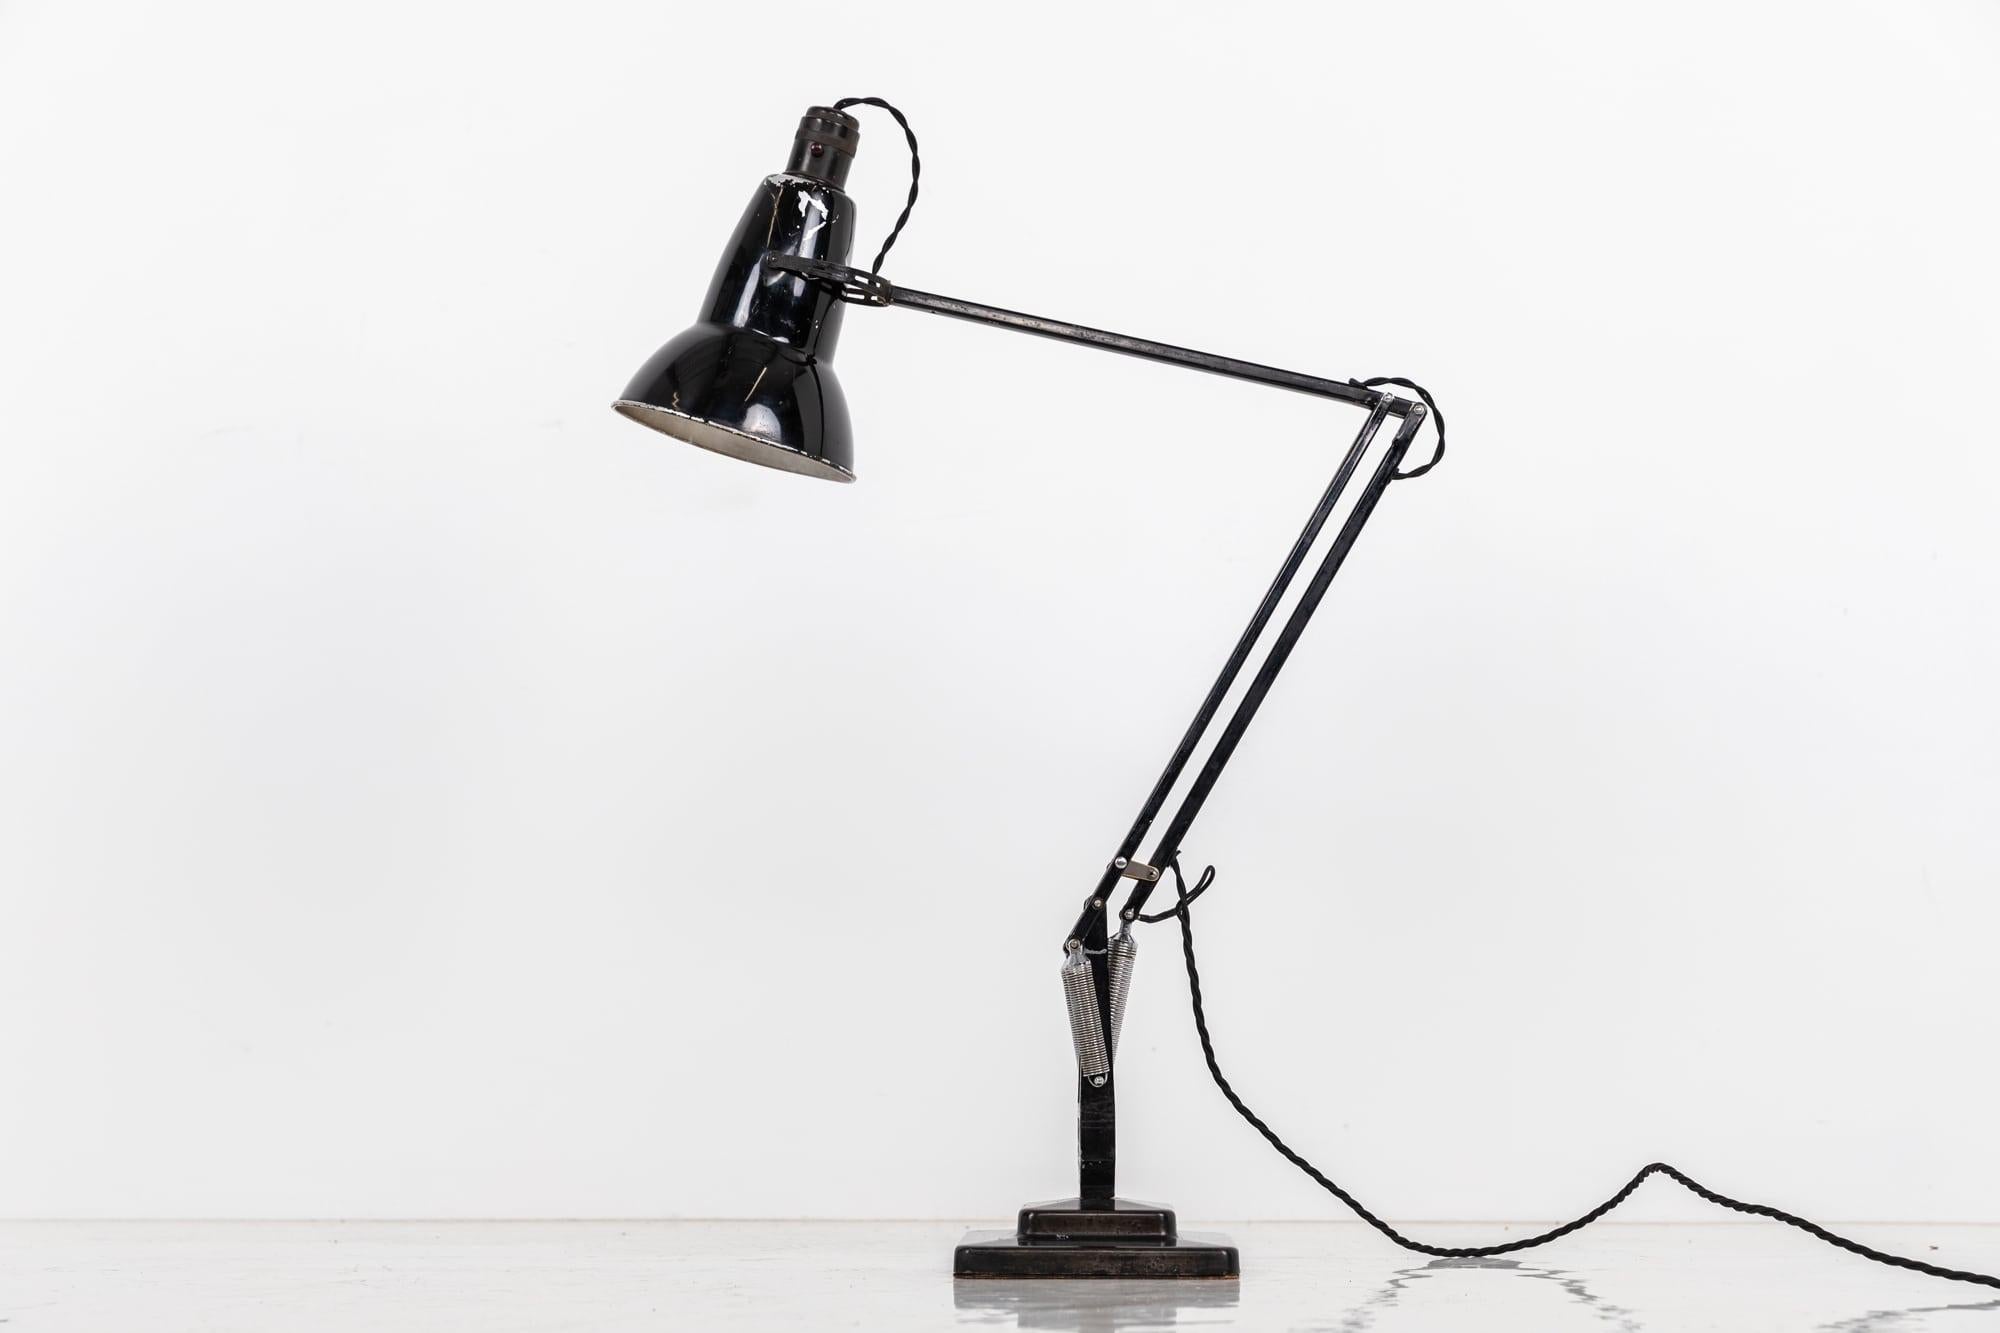 

Iconic angelpoise lamp made by Herbert Terry & Sons. c.1940

One of the most famous desk lamps in british industrial history and still made to this day. In fully original condition including the Bakelite Crabtree switch.

Rewired with 2m of black